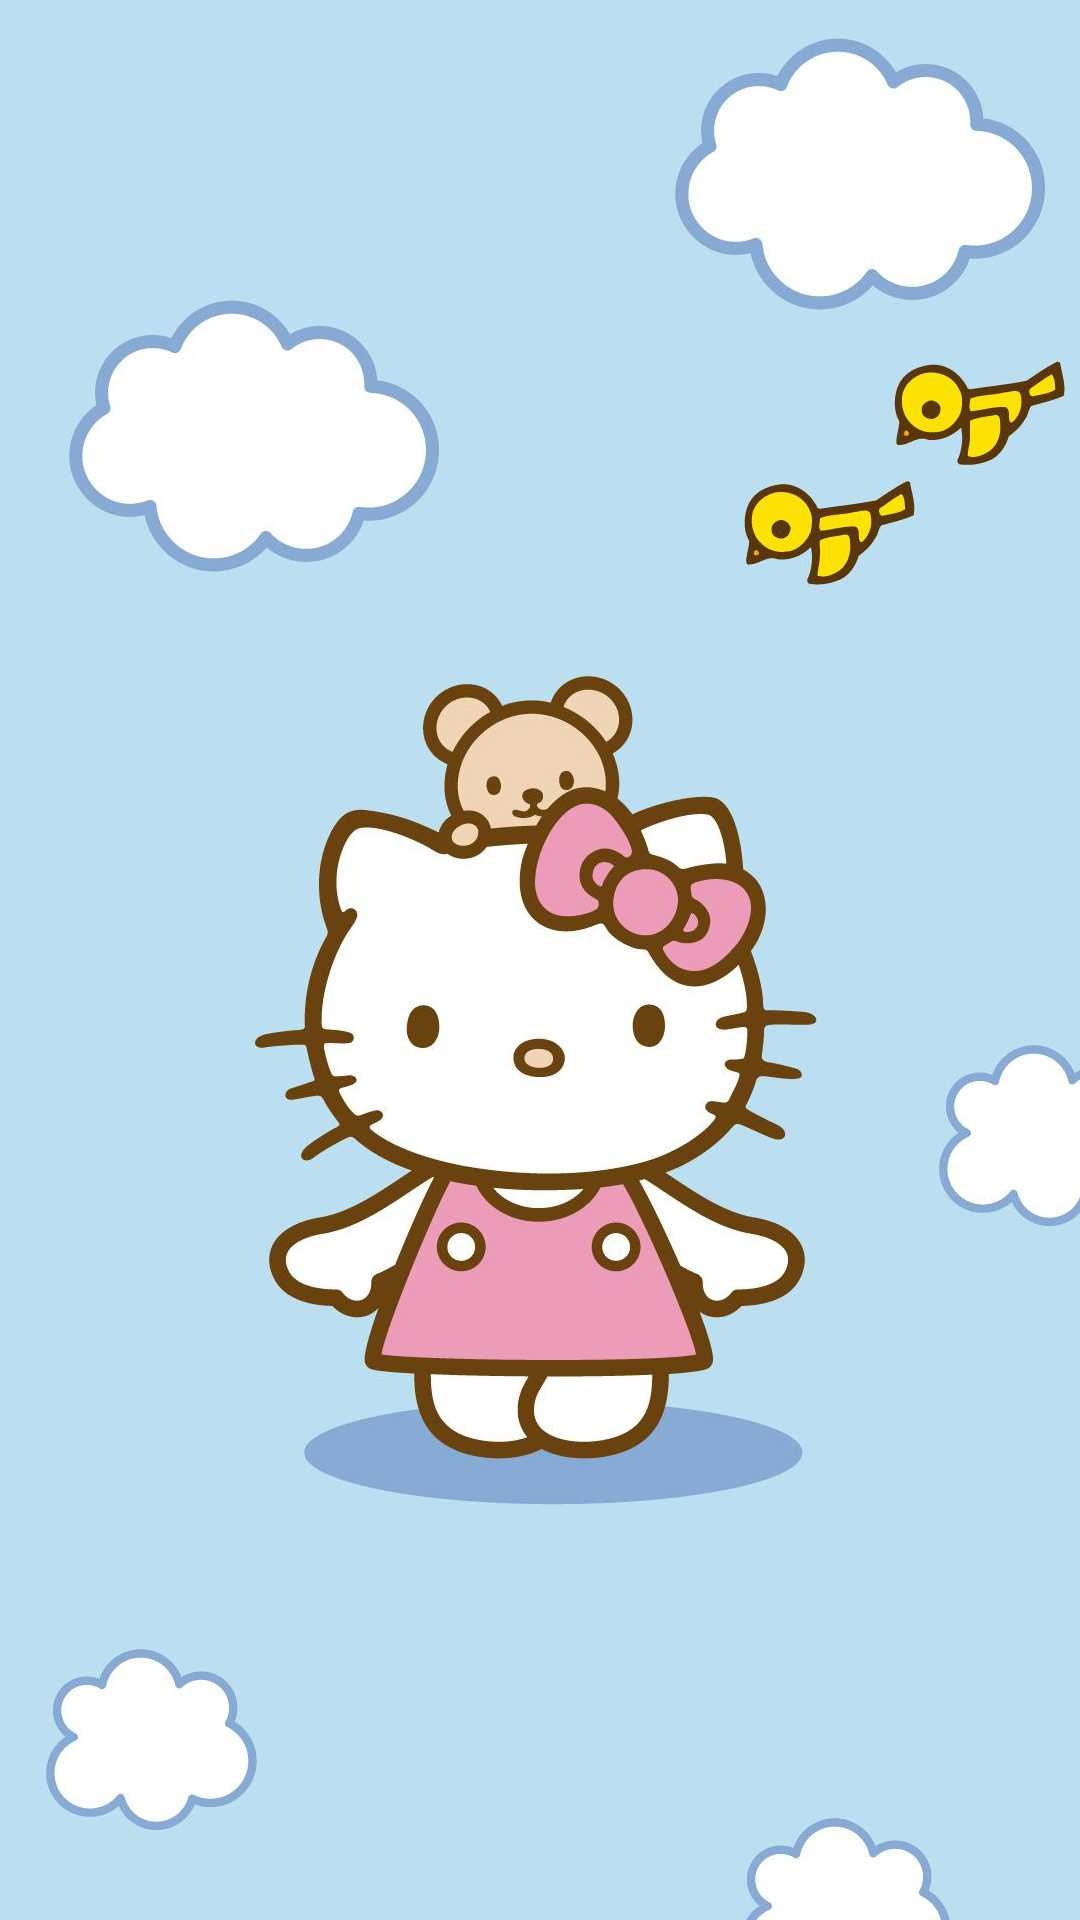 Hello Kitty: The character's face has been featured on the sides of Japanese Shinkansen bullet trains. 1080x1920 Full HD Wallpaper.